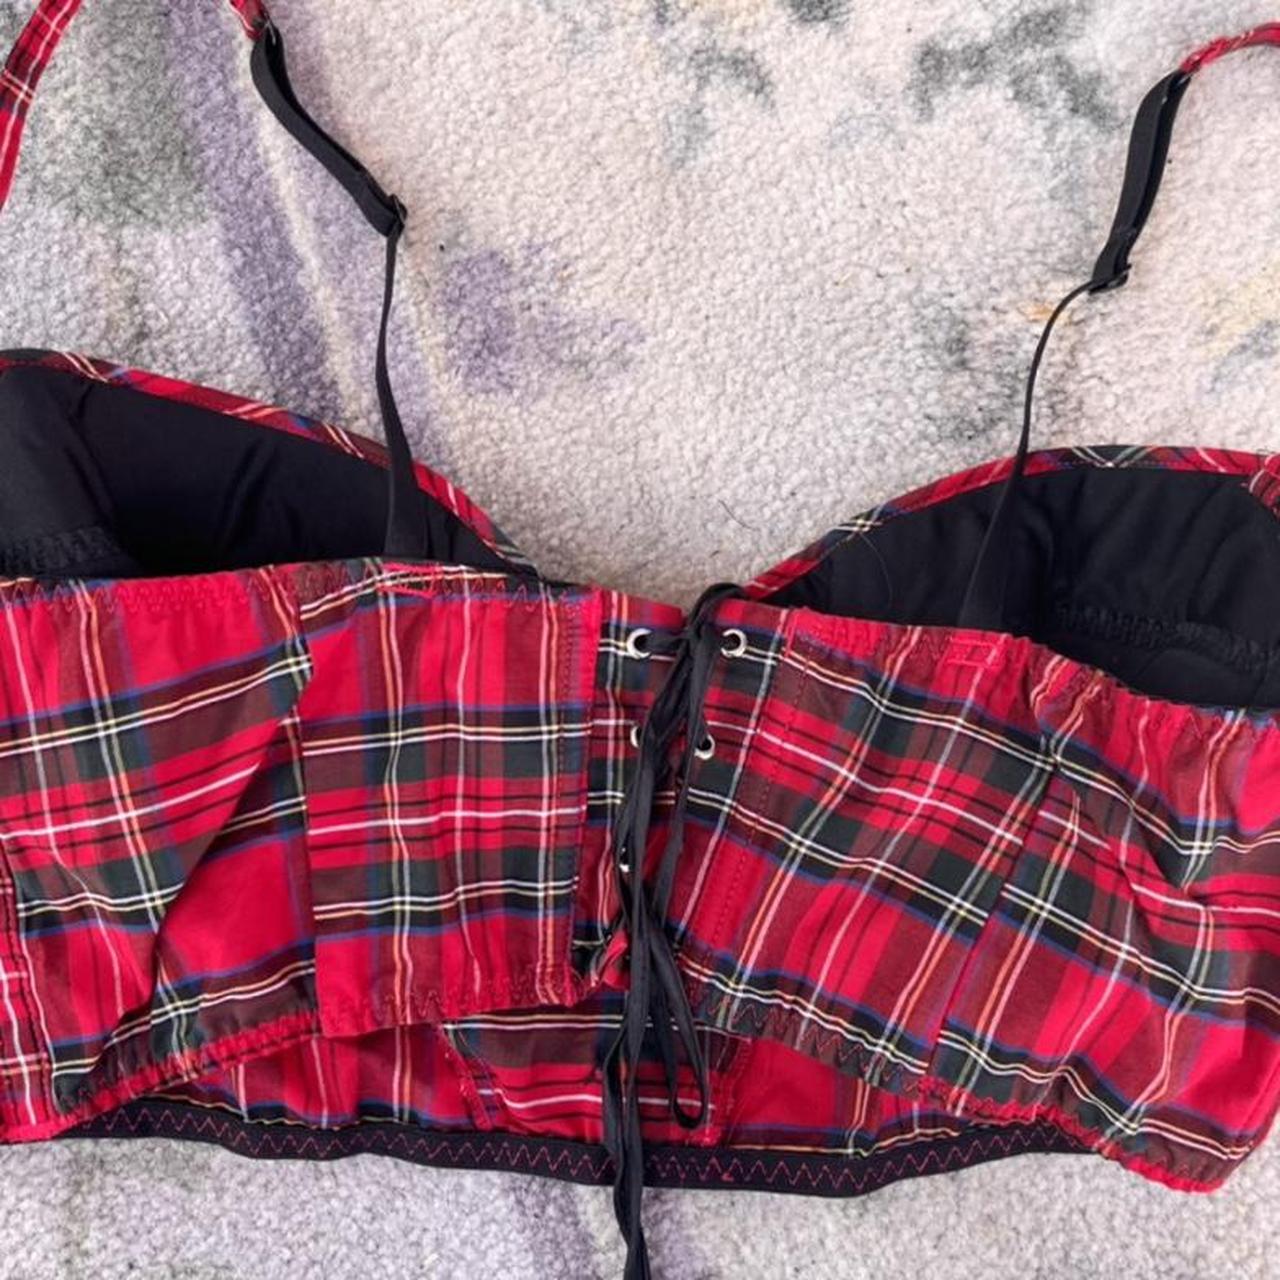 Product Image 3 - fredericks of hollywood corset
plaid red